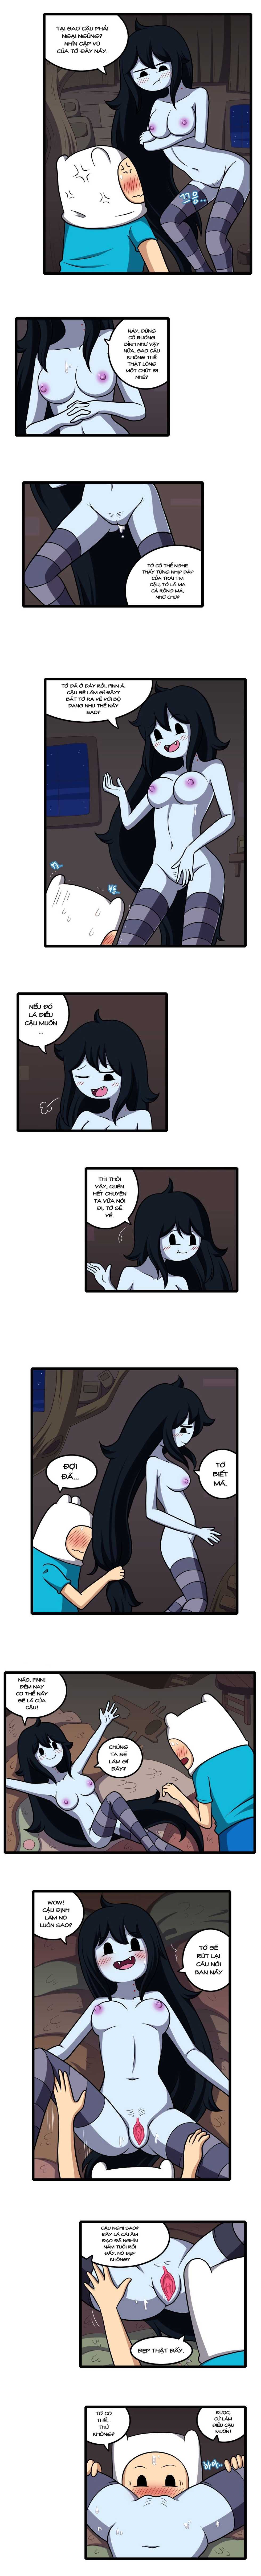 [WB] Adult Time 4 (Adventure Time) [Vietnamese Tiếng Việt] [Demon Victory Team] - Page 8